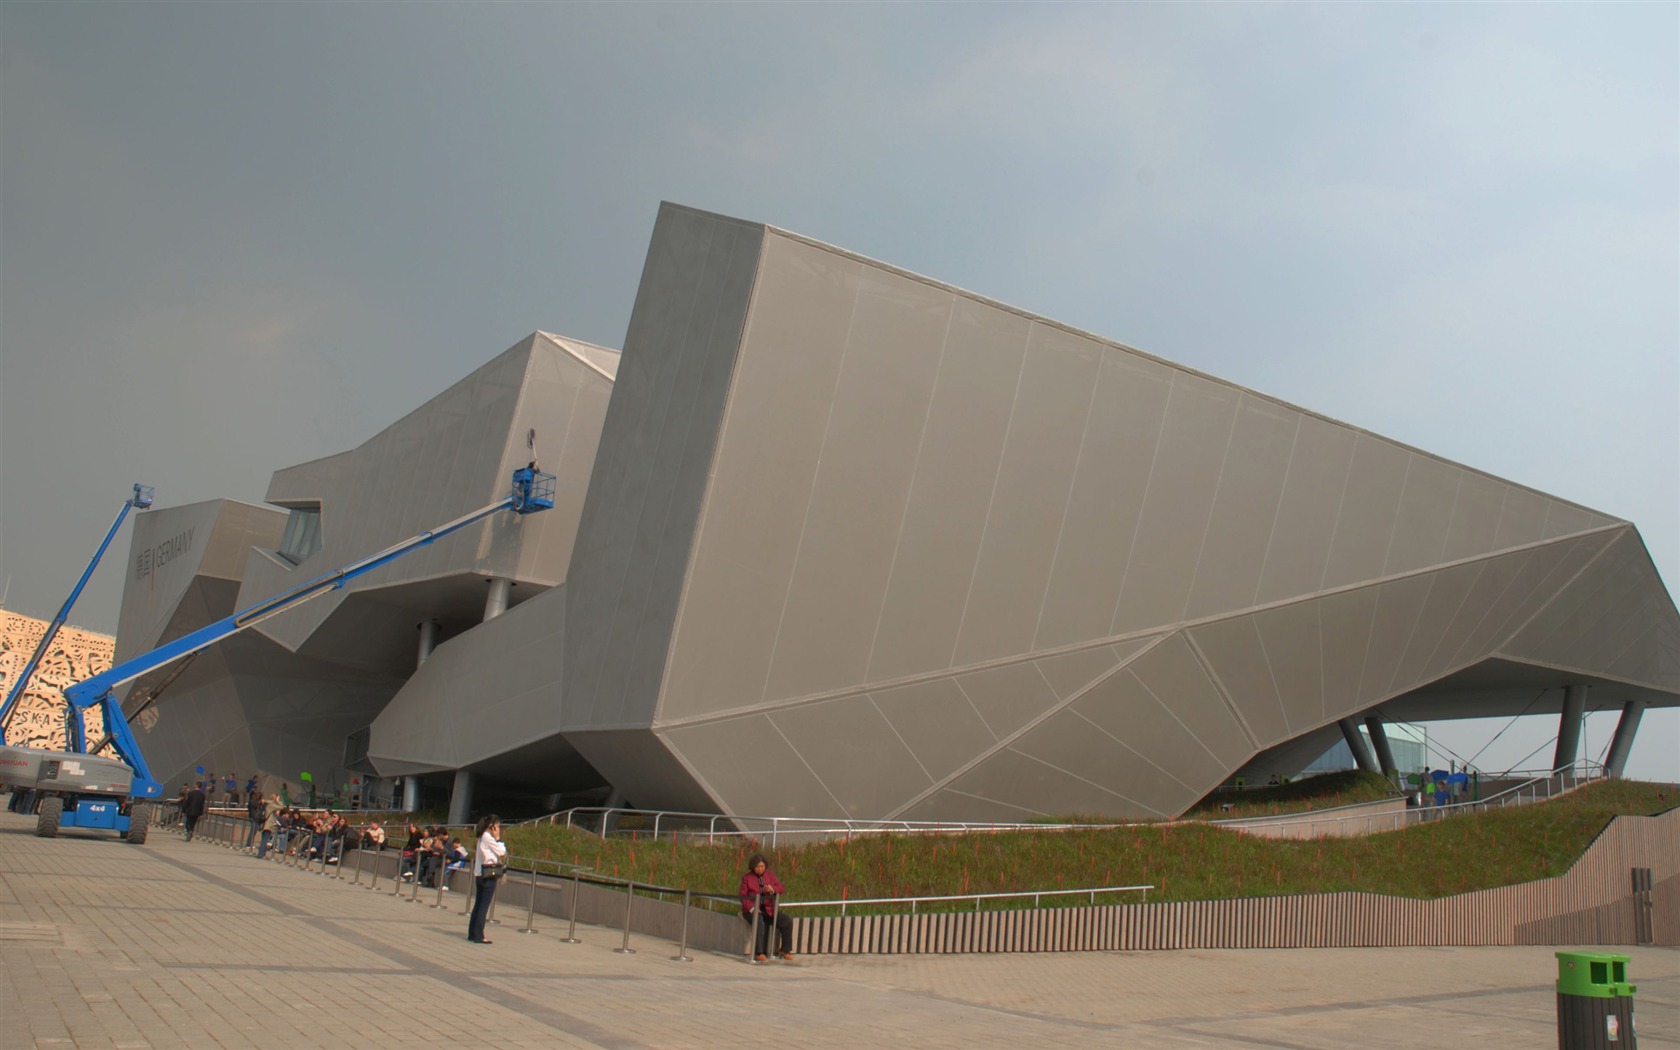 Commissioning of the 2010 Shanghai World Expo (studious works) #21 - 1680x1050